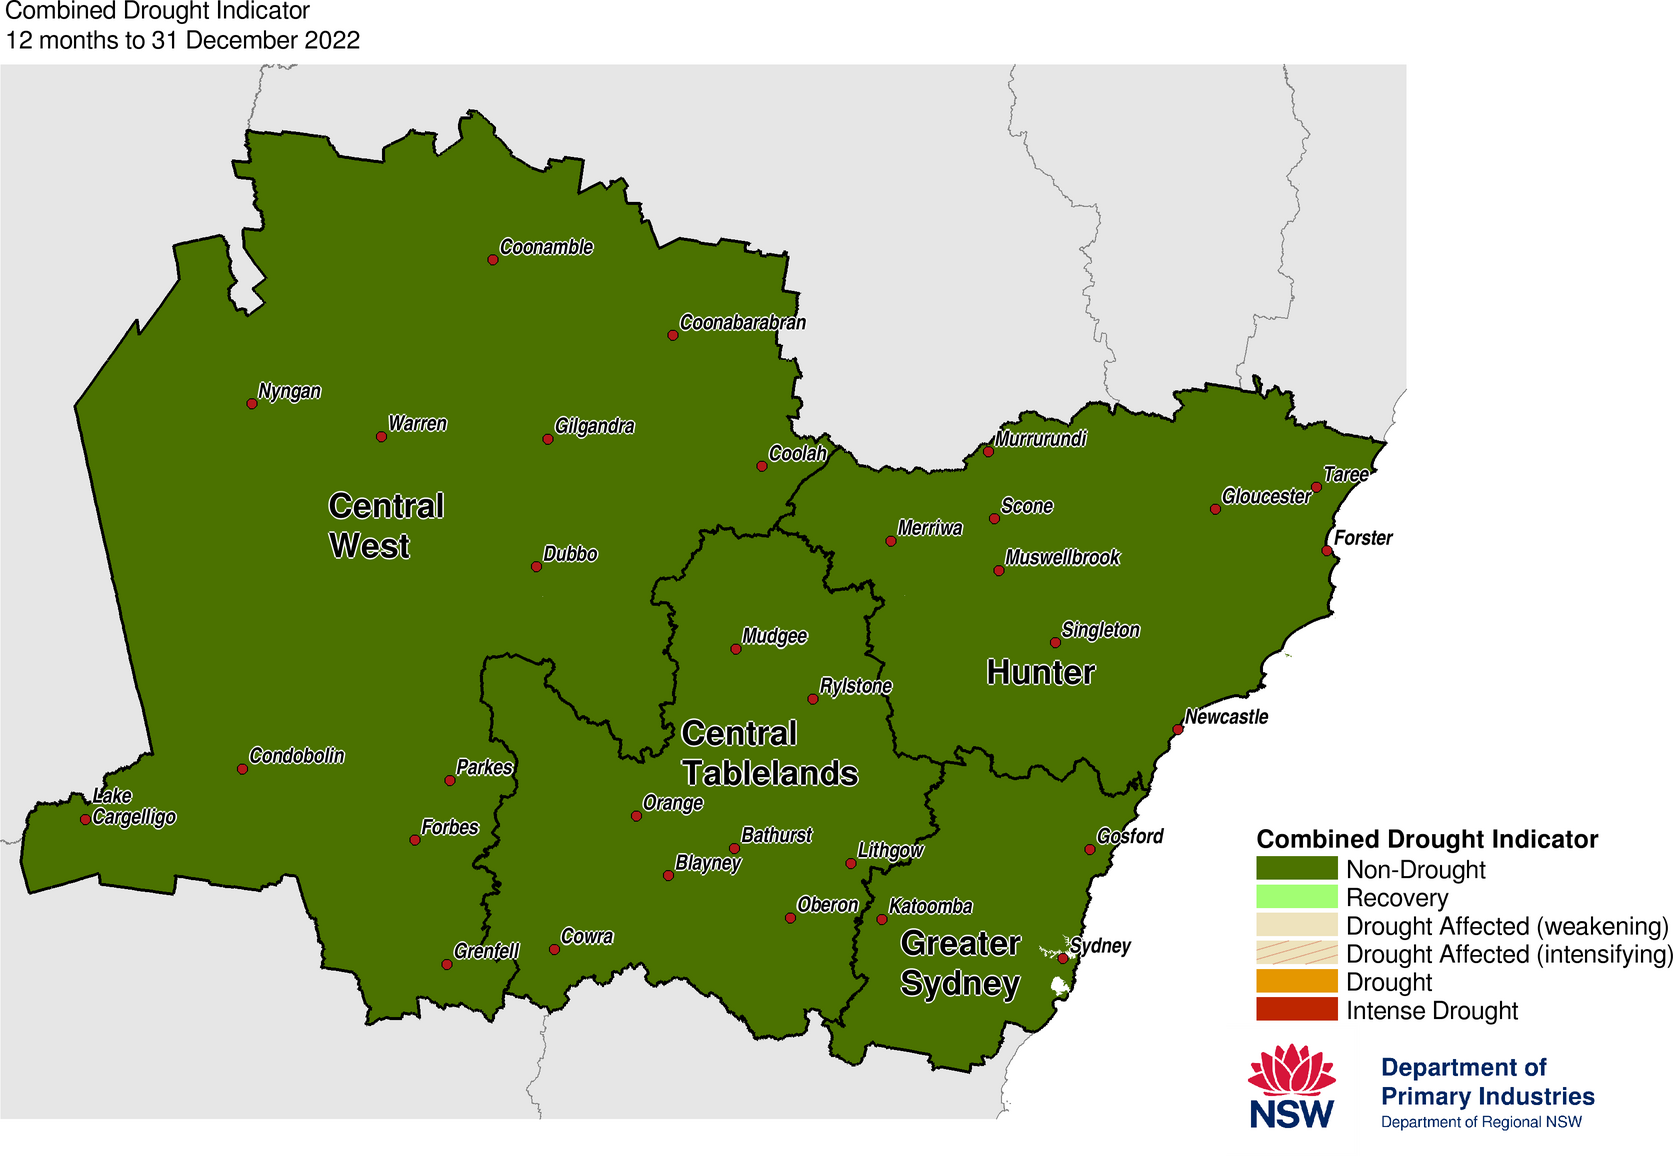 Figure 20. Combined Drought Indicator for the Central Tablelands, Central West, Hunter and Greater Sydney regions